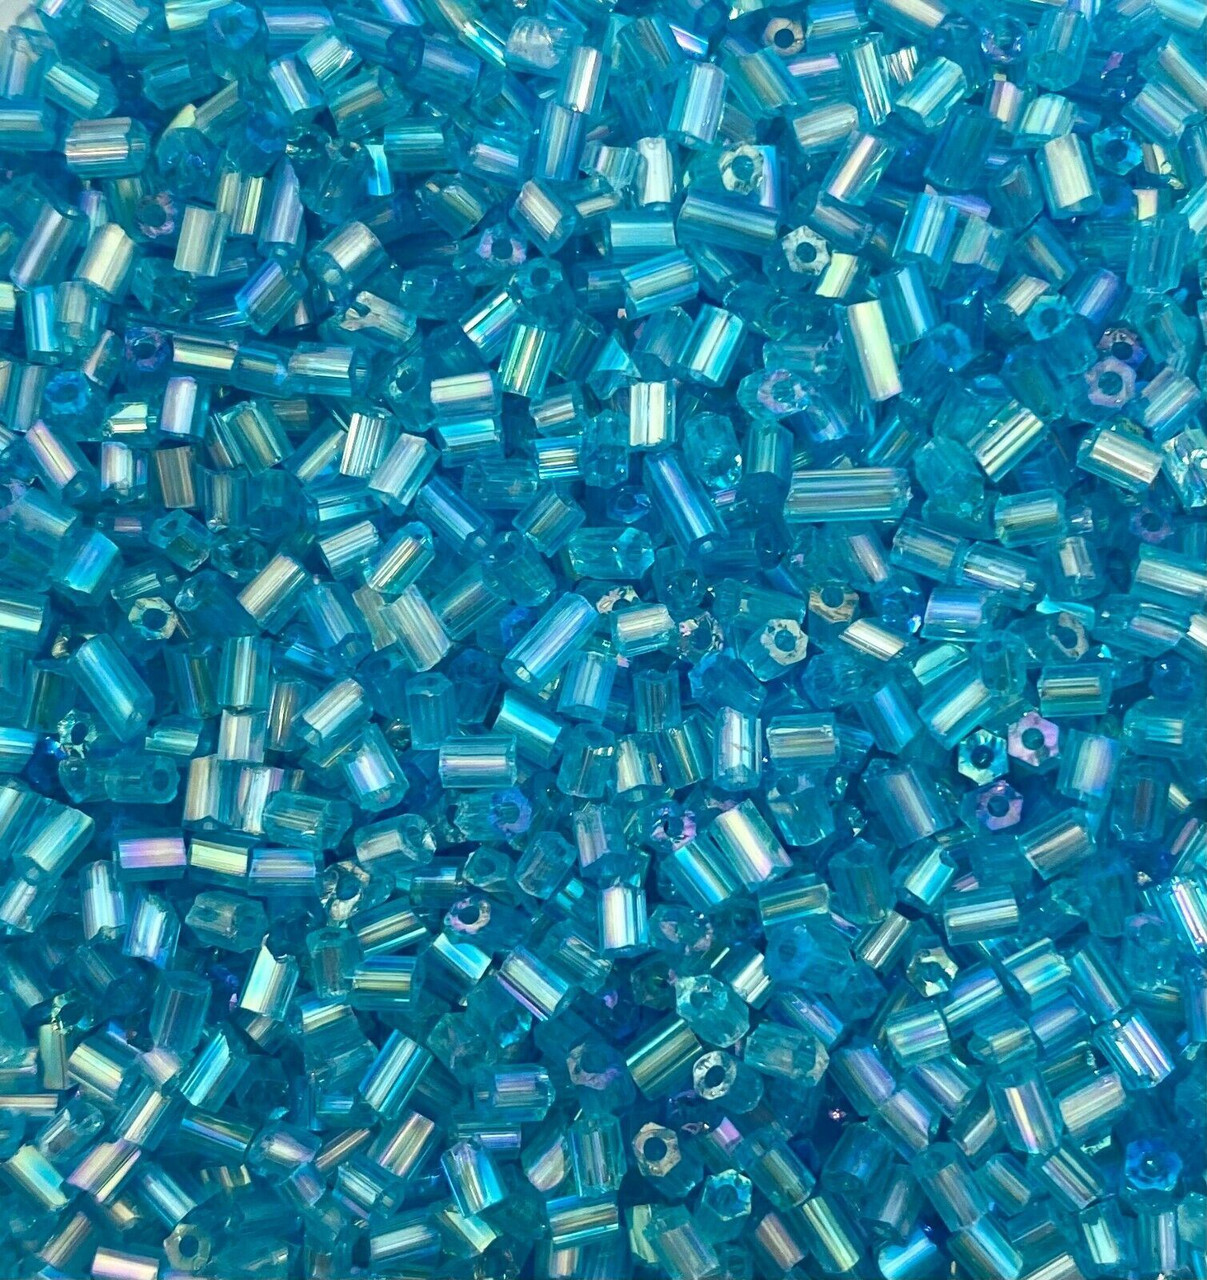 50g glass HEX seed beads - Turquoise Rainbow, size 11/0 (approx 2mm)